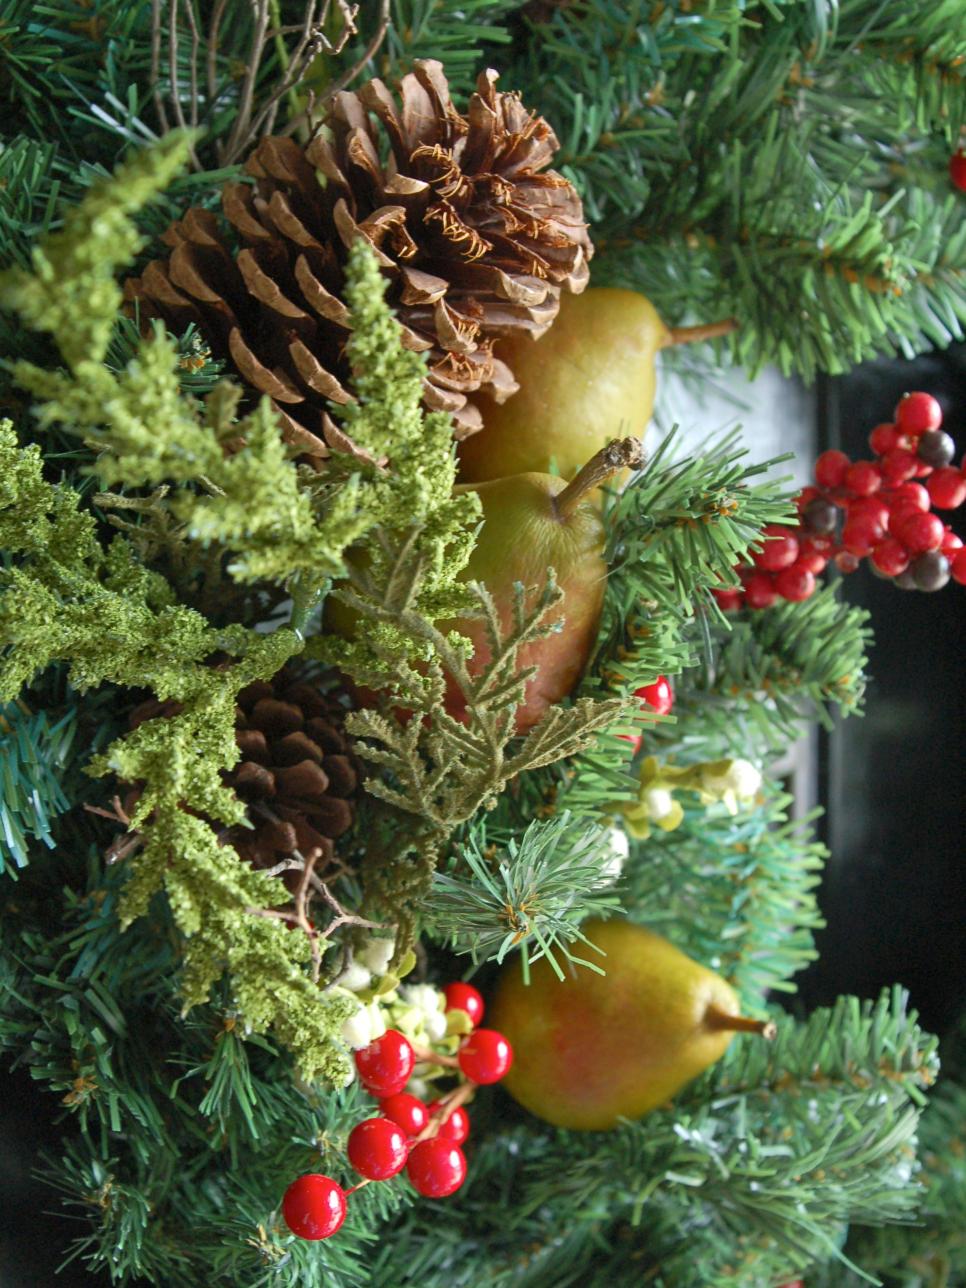 Decorating with Holiday Greens